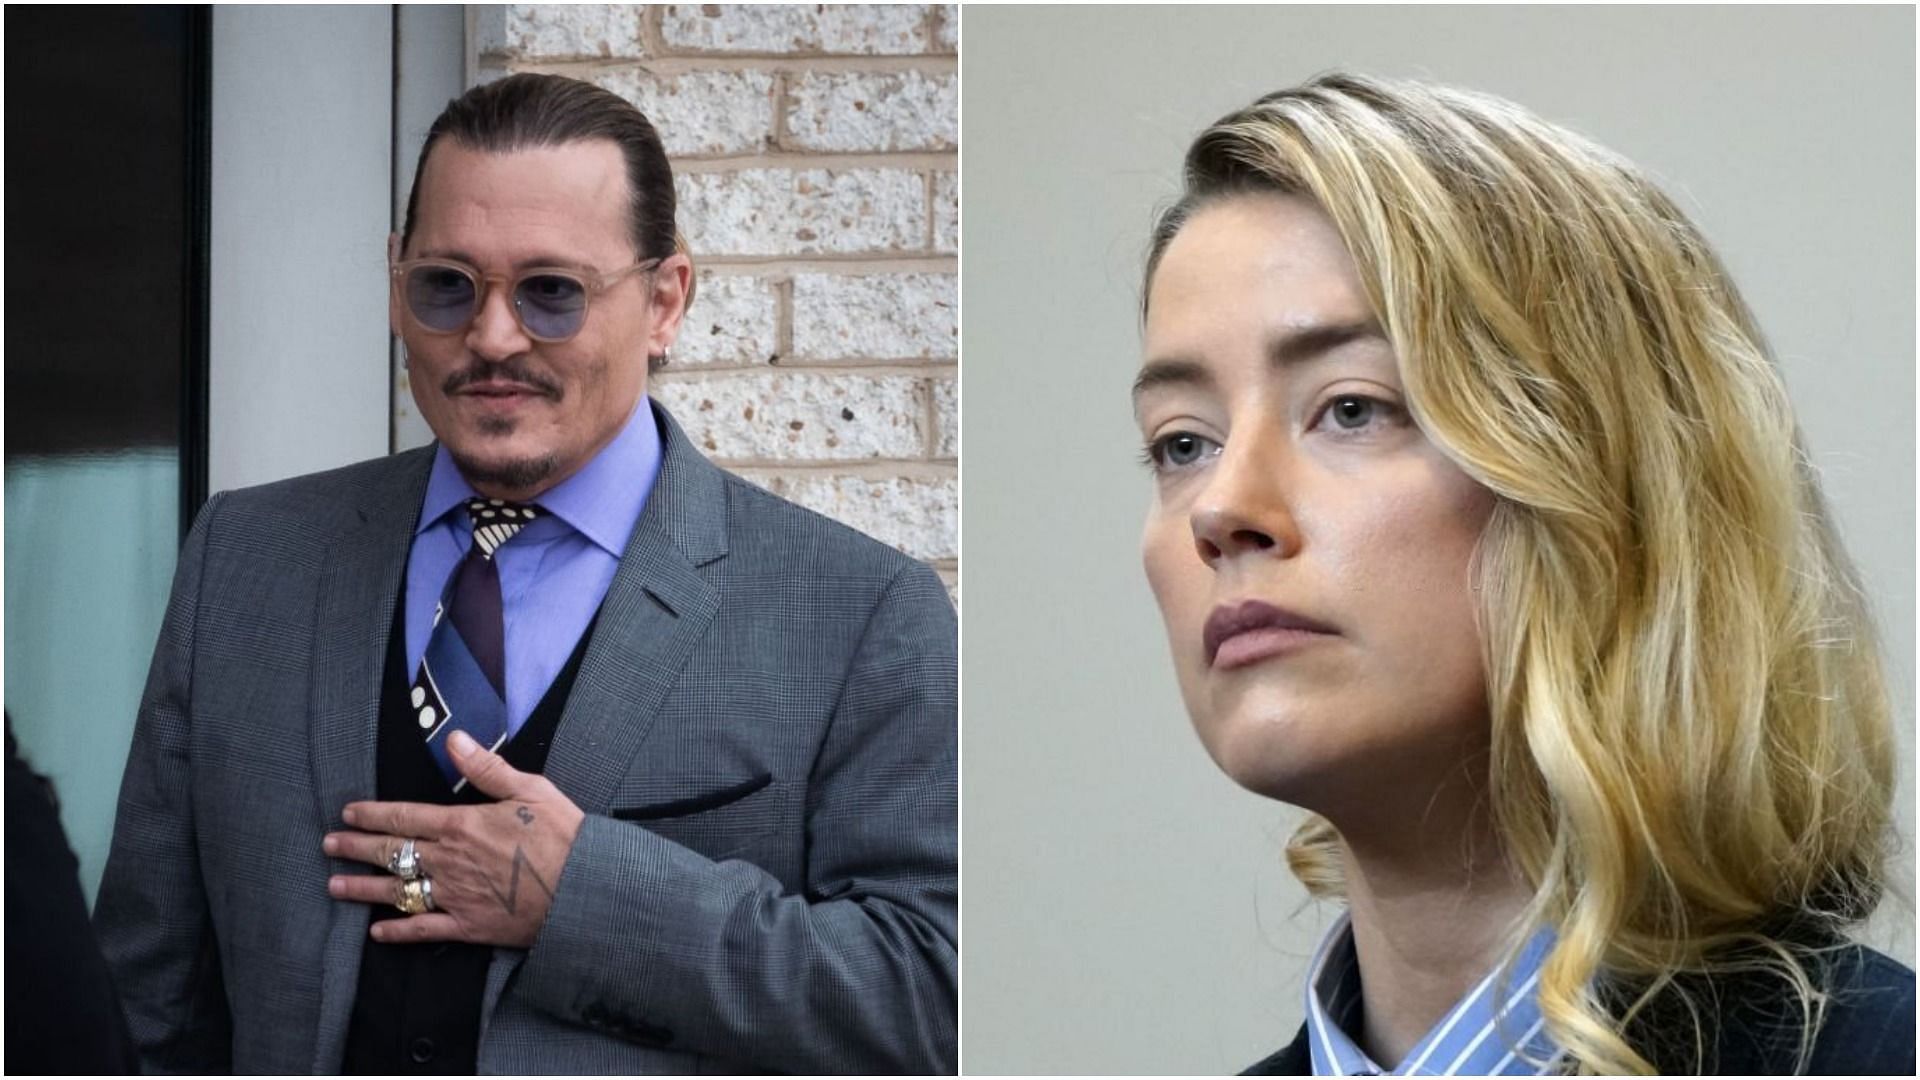 Johnny Depp and Amber Heard&#039;s defamation trial will continue on Monday (Images via Cliff Owen and Elizabeth Frantz/Getty Images)